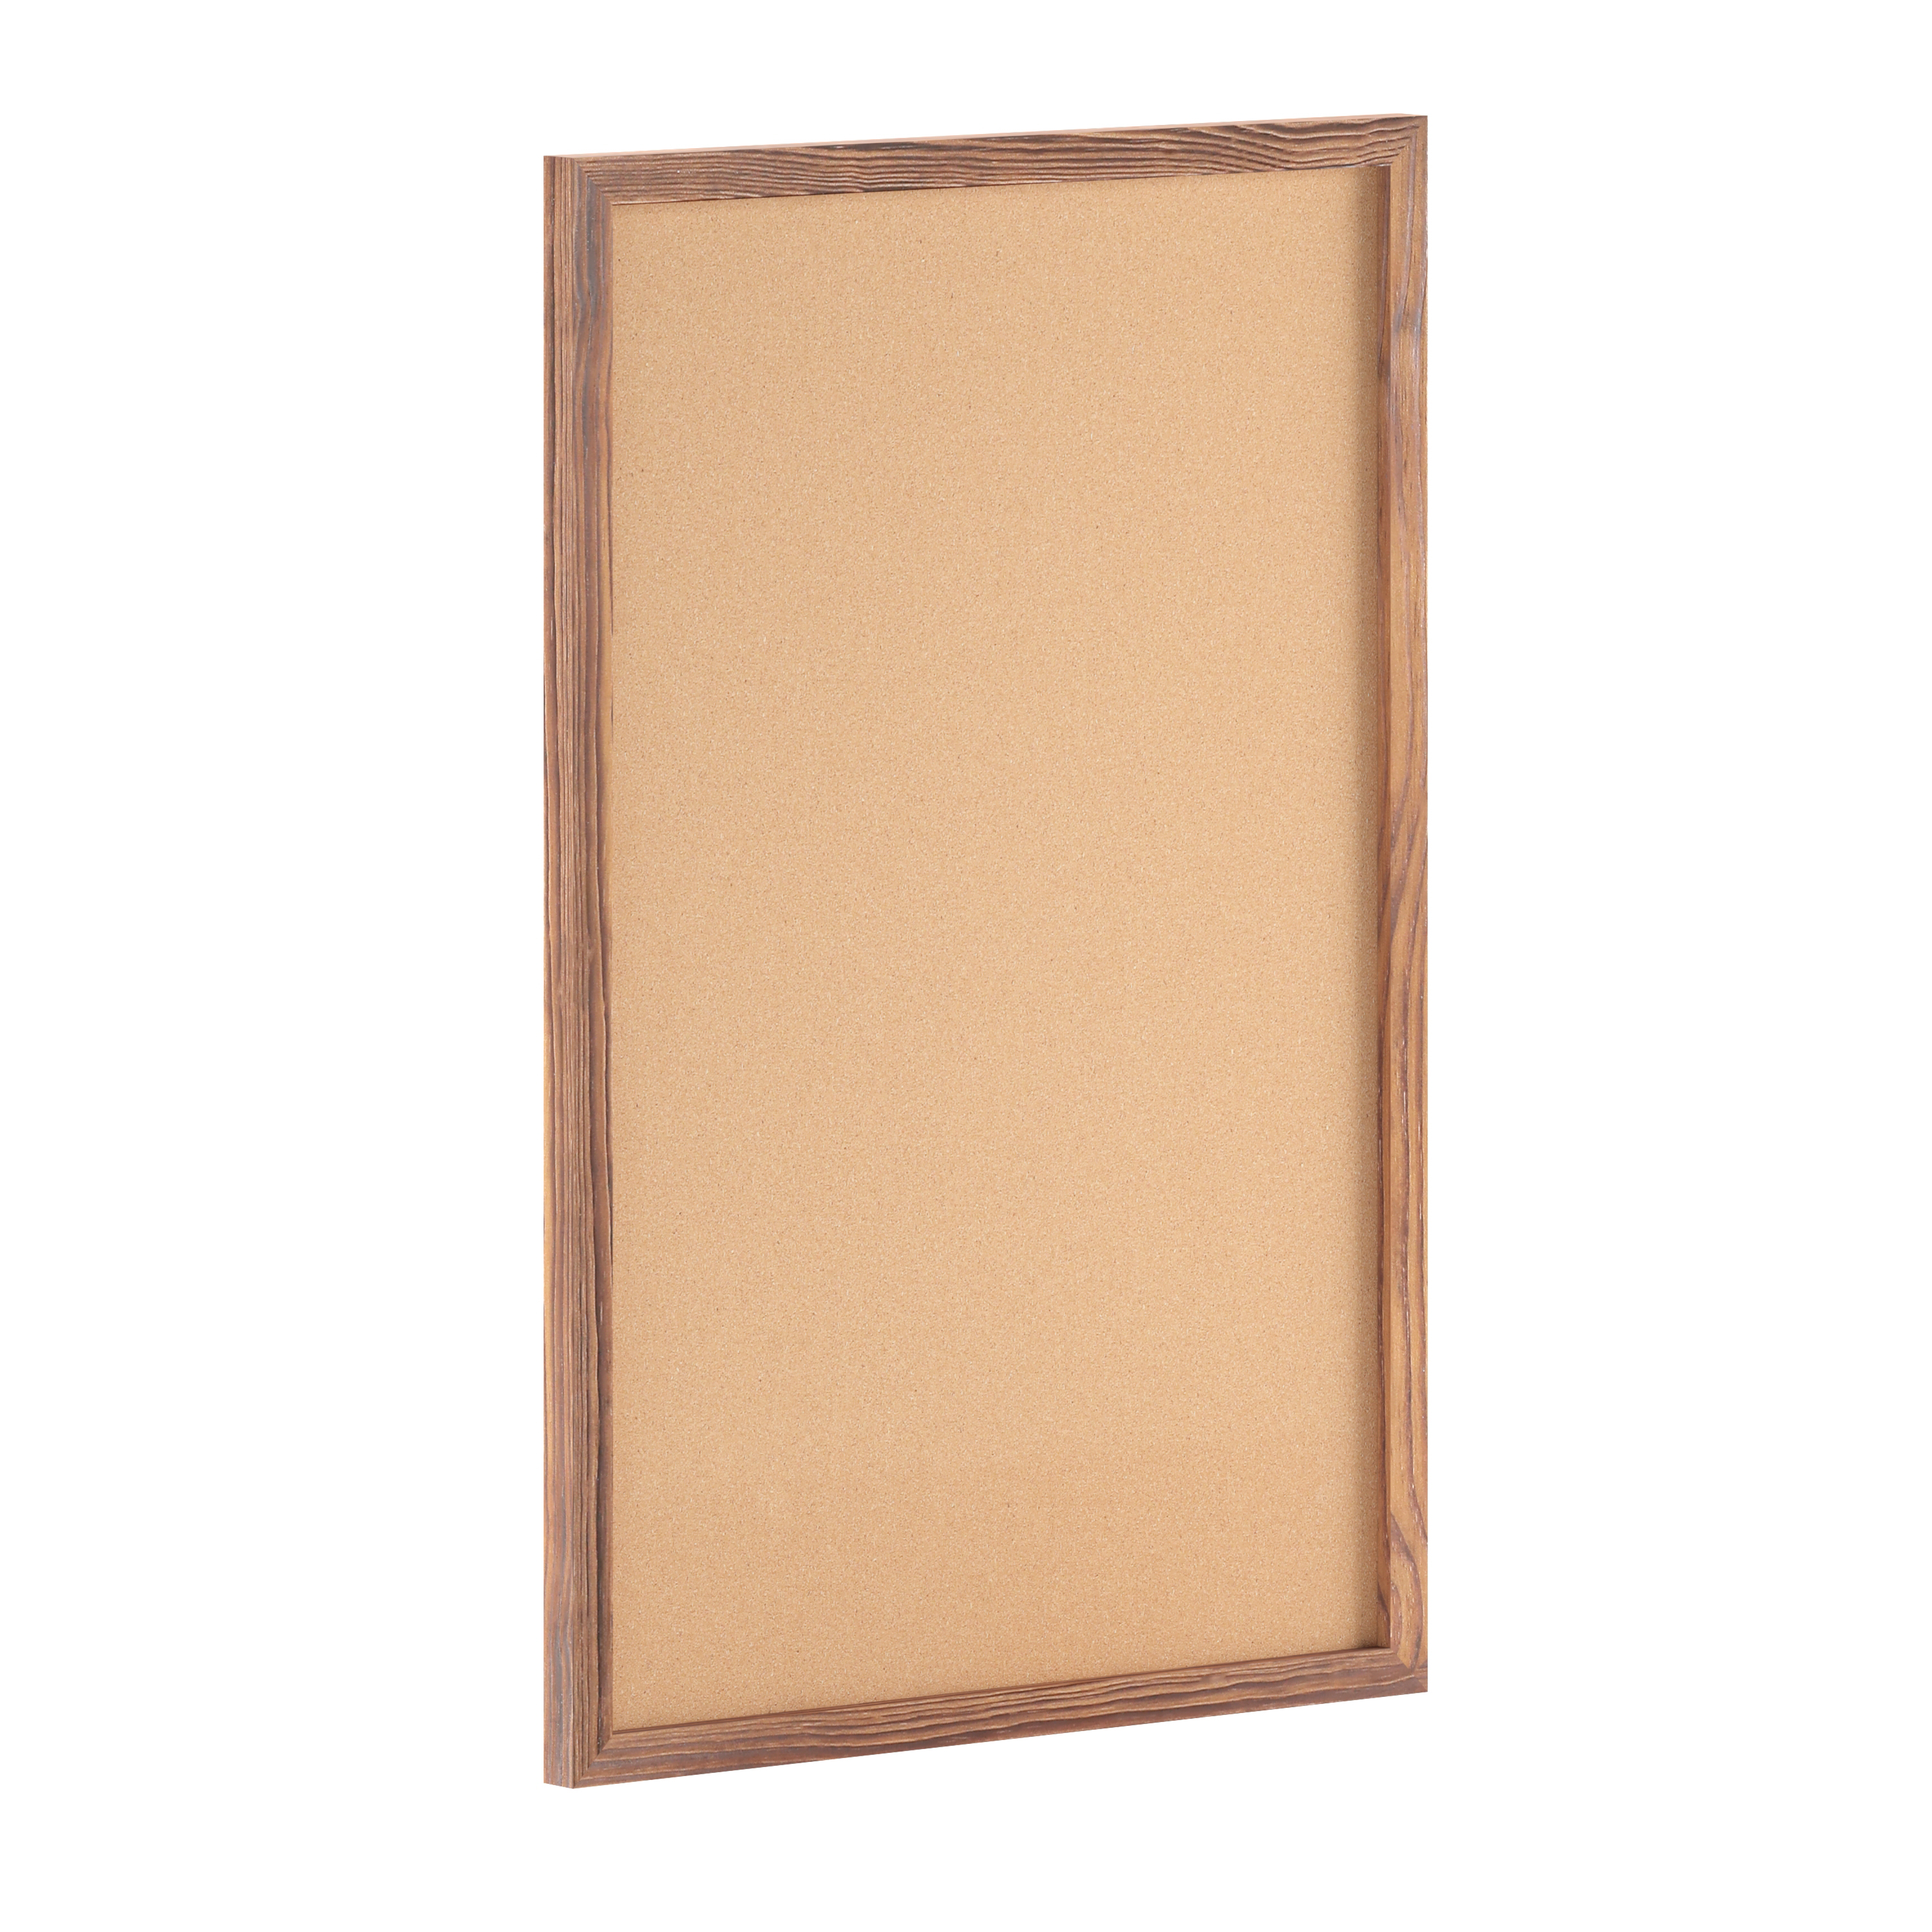 Flash Furniture HGWA-CK-24X36-BRN-GG Camden Rustic 24" x 36" Wall Mount Cork Board with Wooden Push Pins for Home, School, or Business in Torched Brown